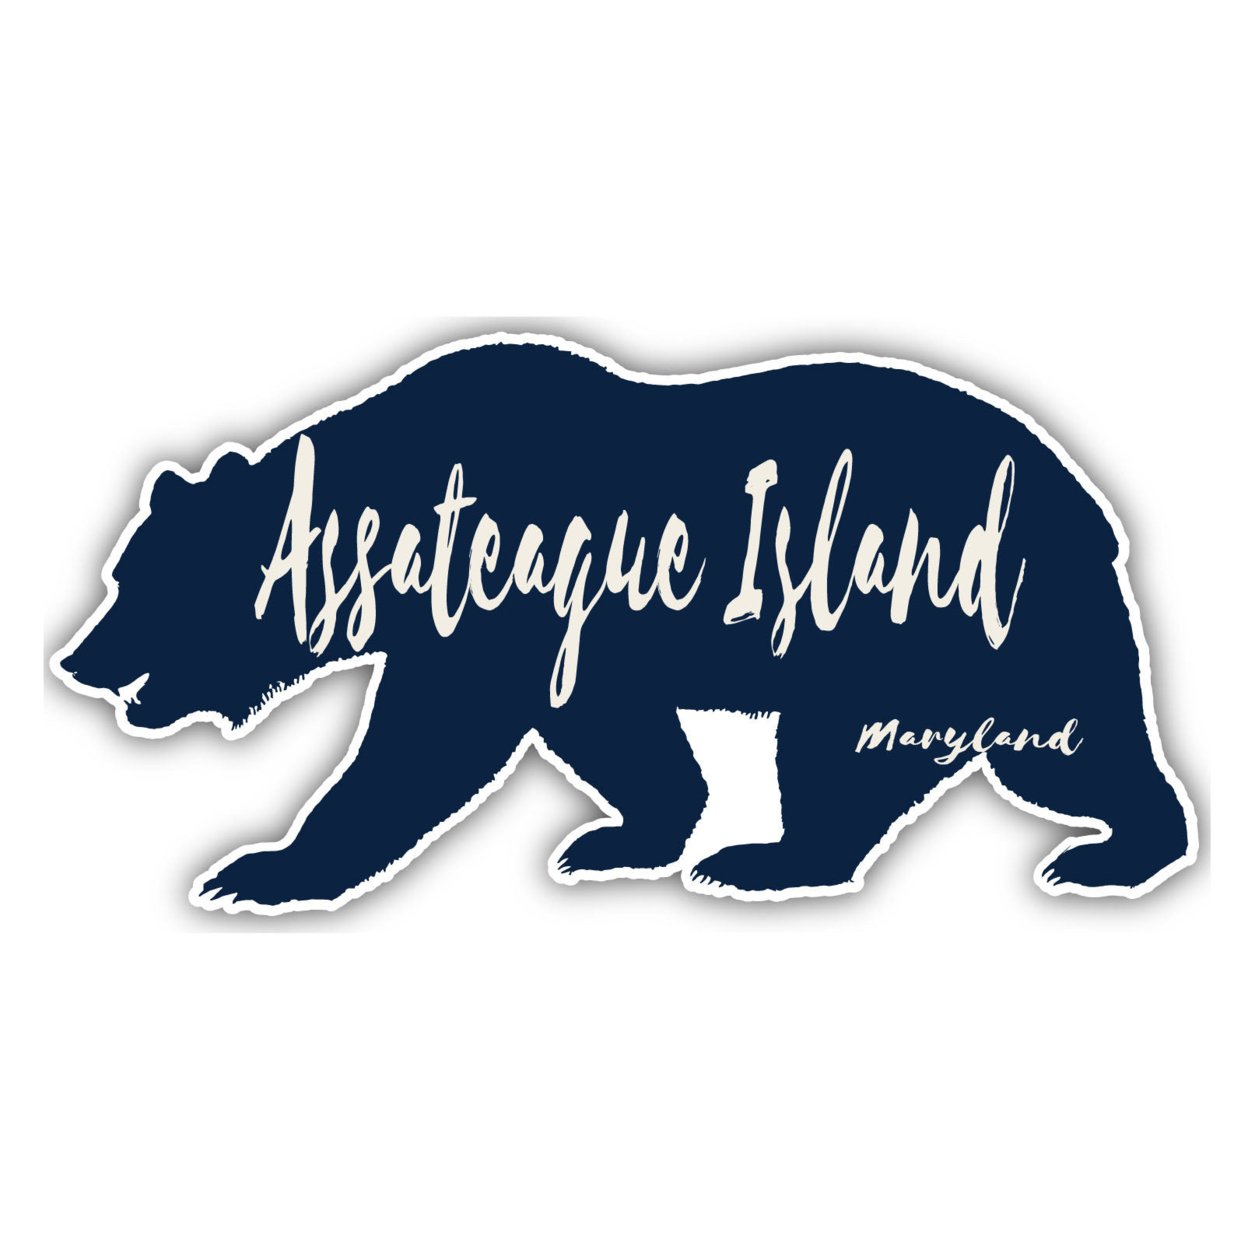 Assateague Island Maryland Souvenir Decorative Stickers (Choose Theme And Size) - 4-Pack, 6-Inch, Bear